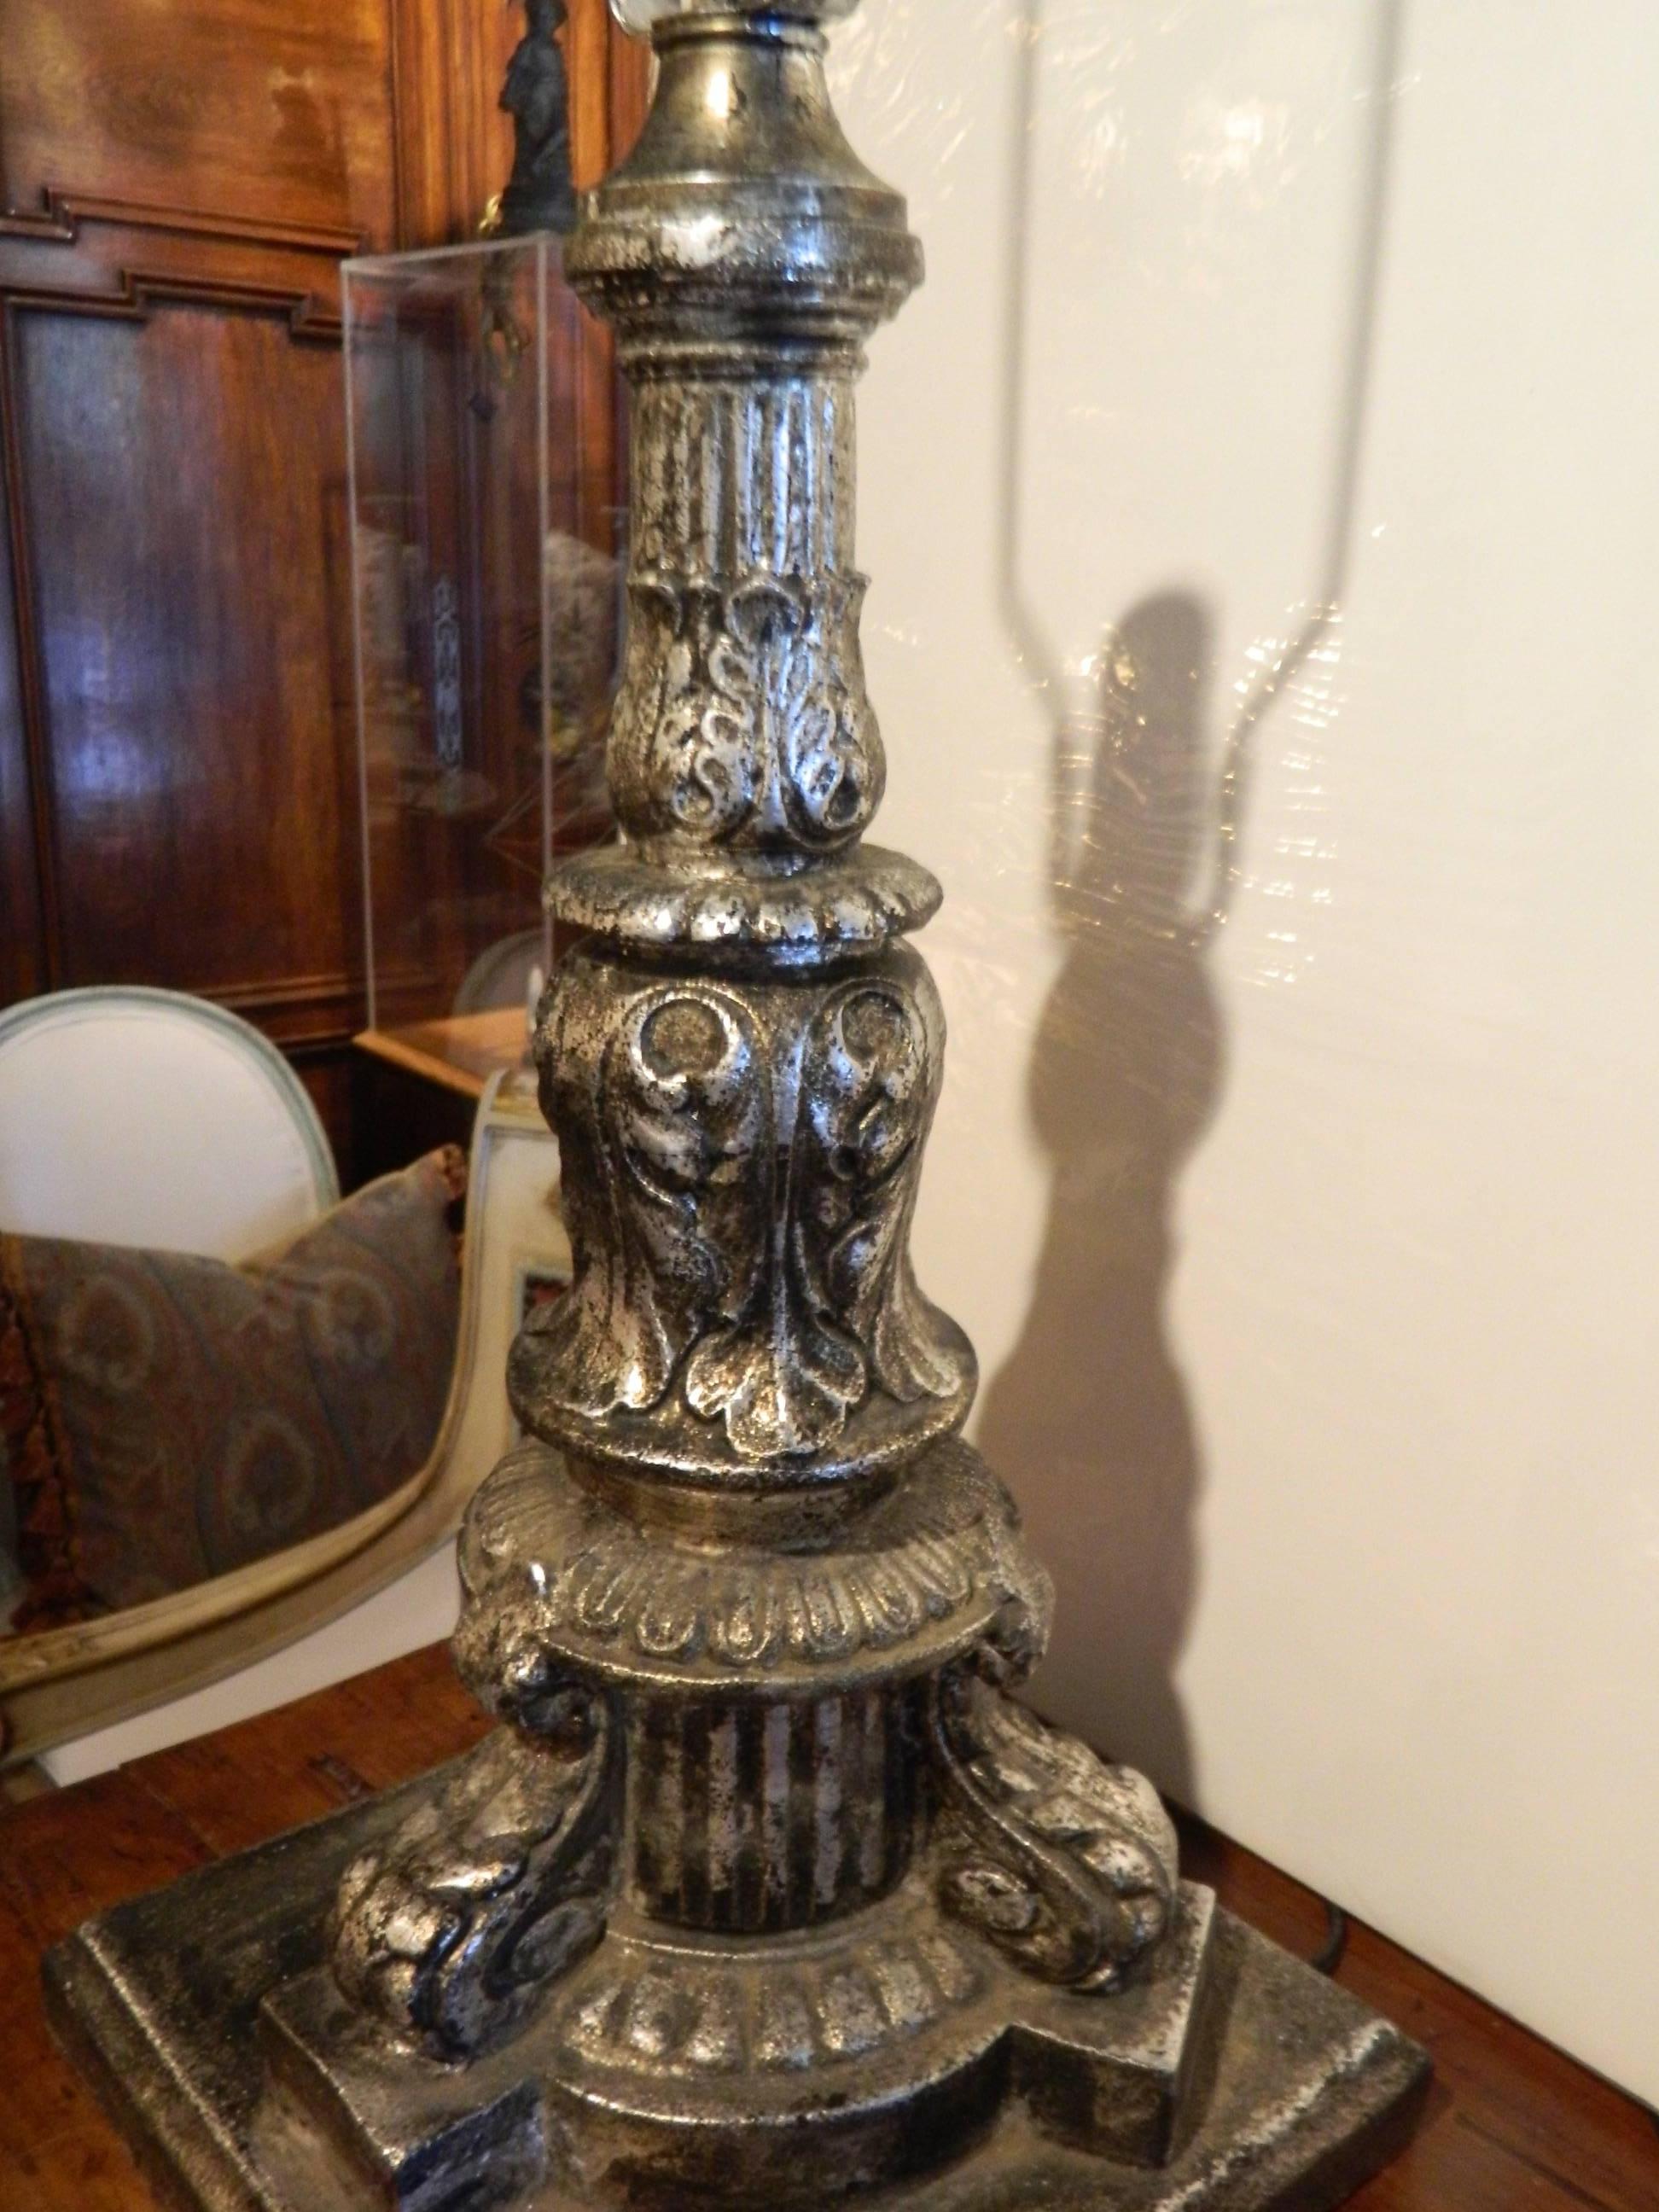 Pair of iron silver leaf architectural elements adapted as lamps, 19th century.